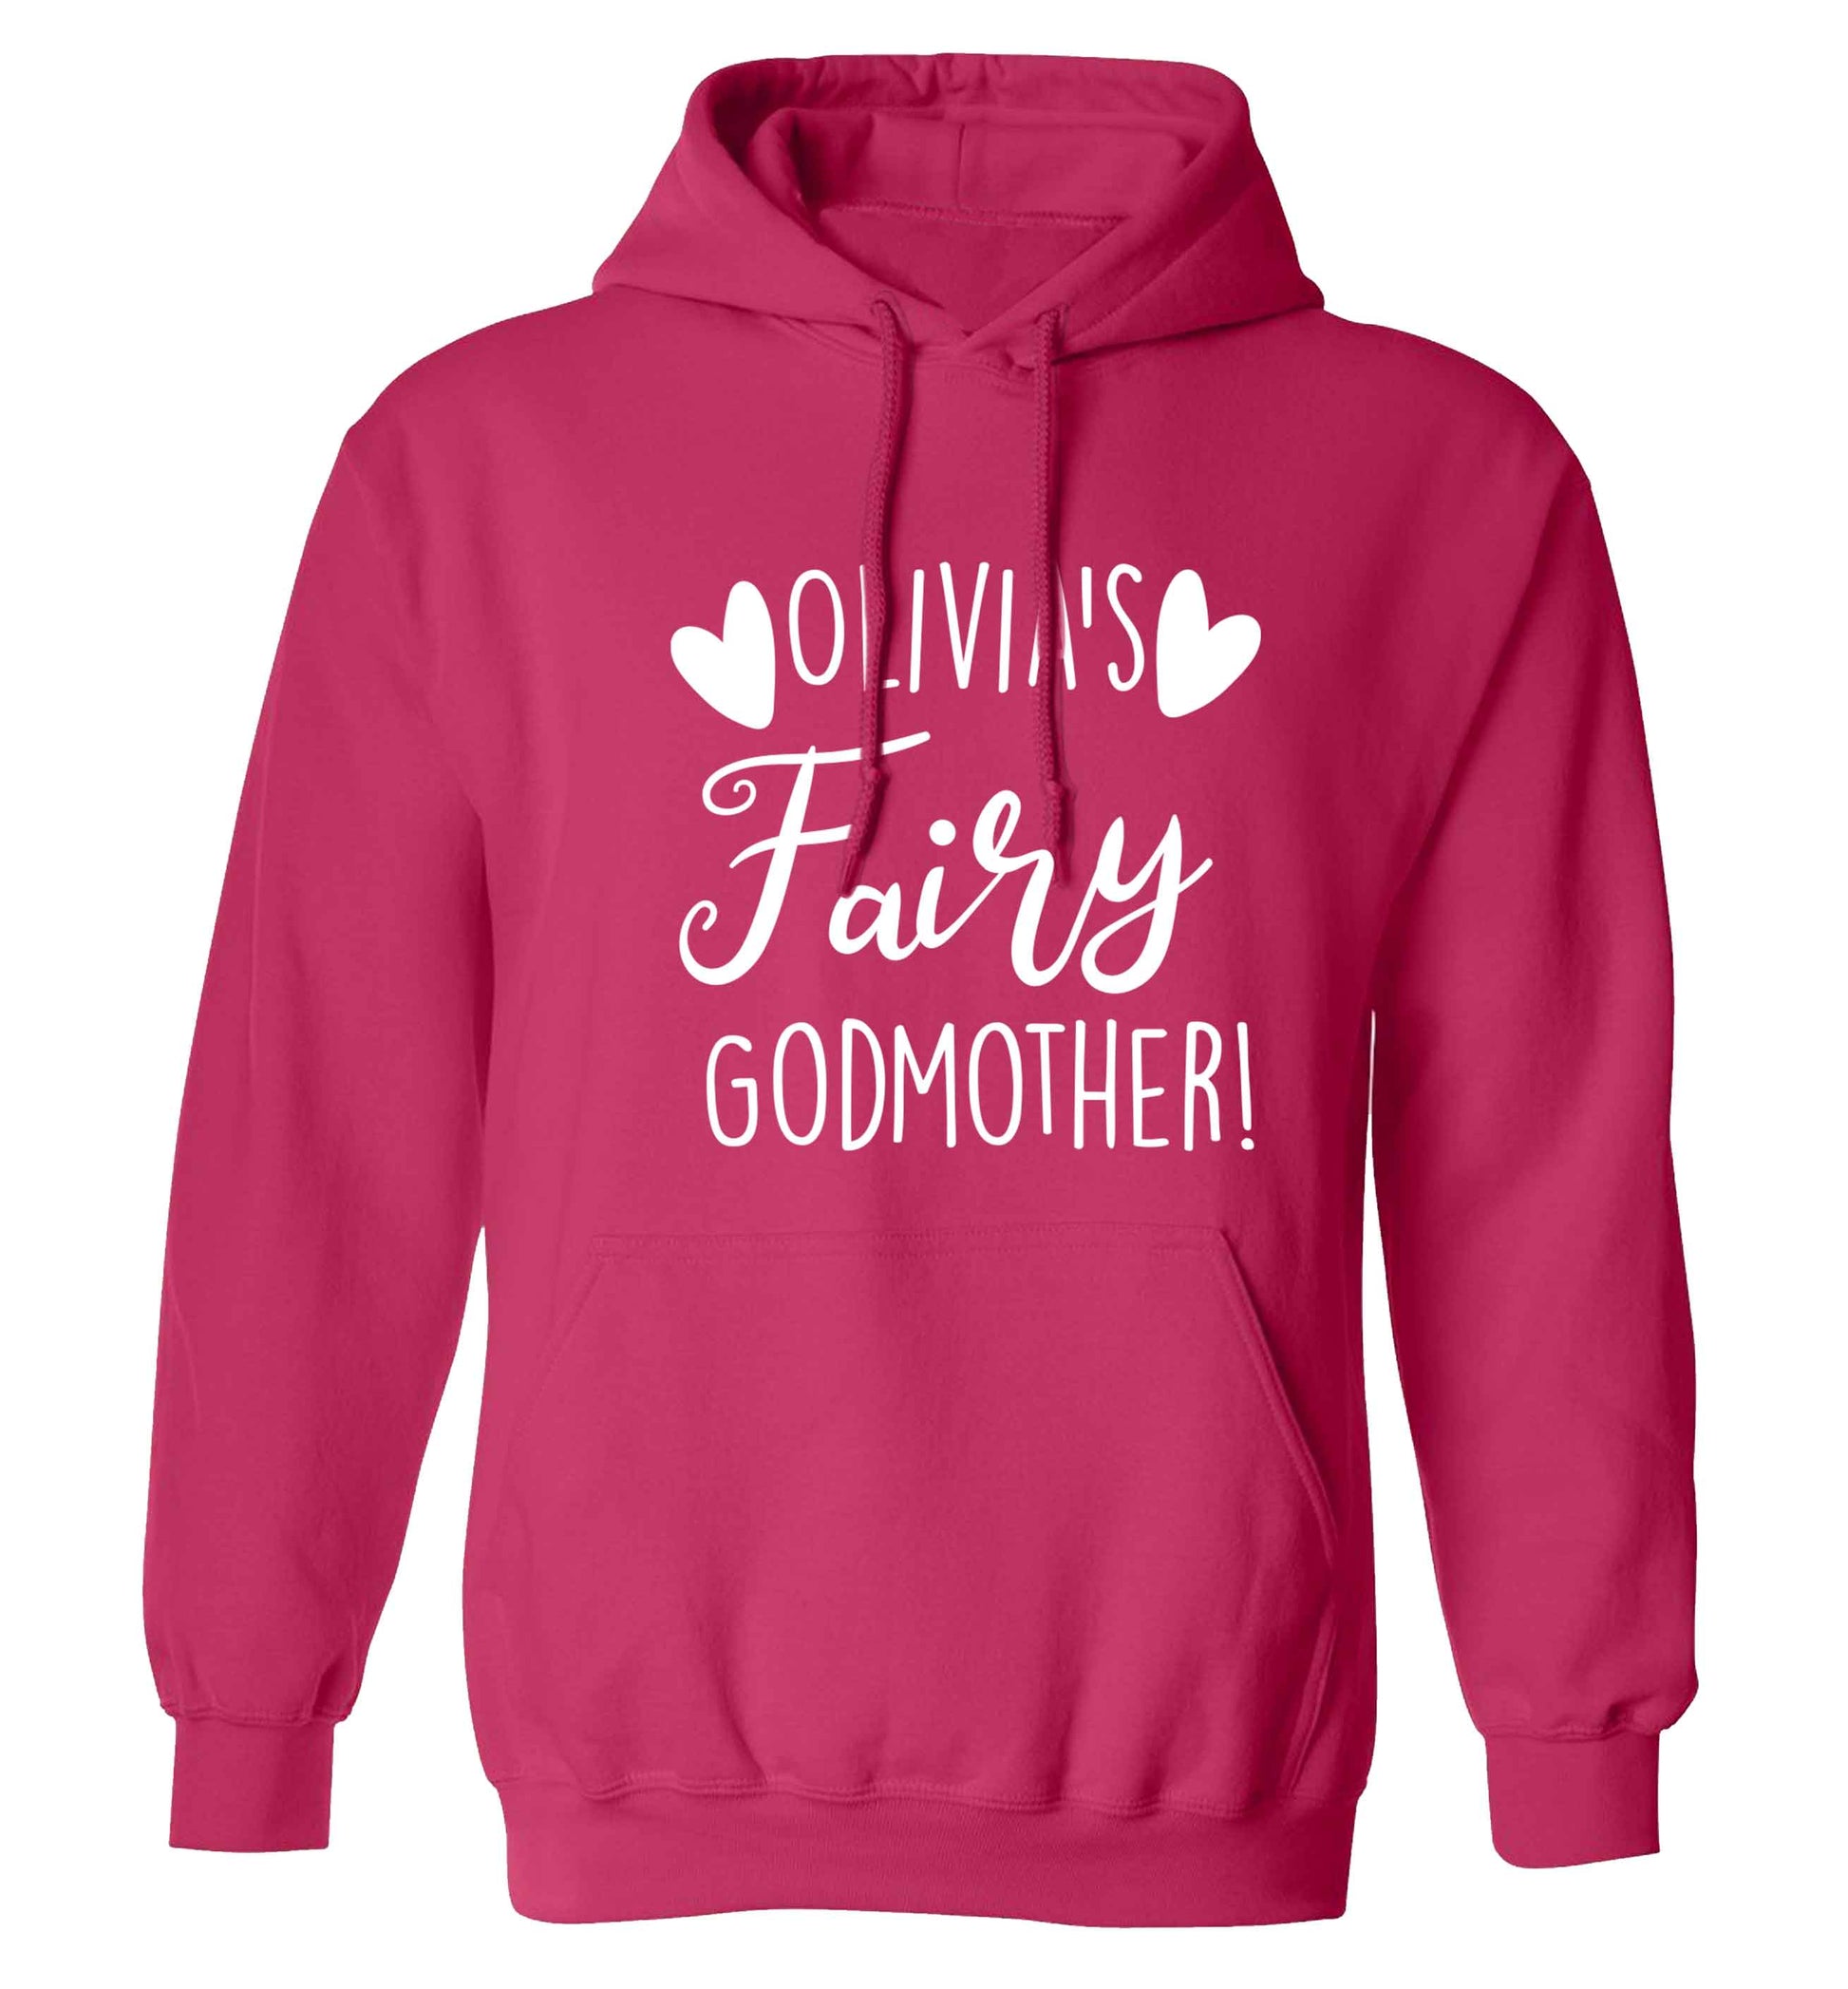 Personalised fairy Godmother adults unisex pink hoodie 2XL